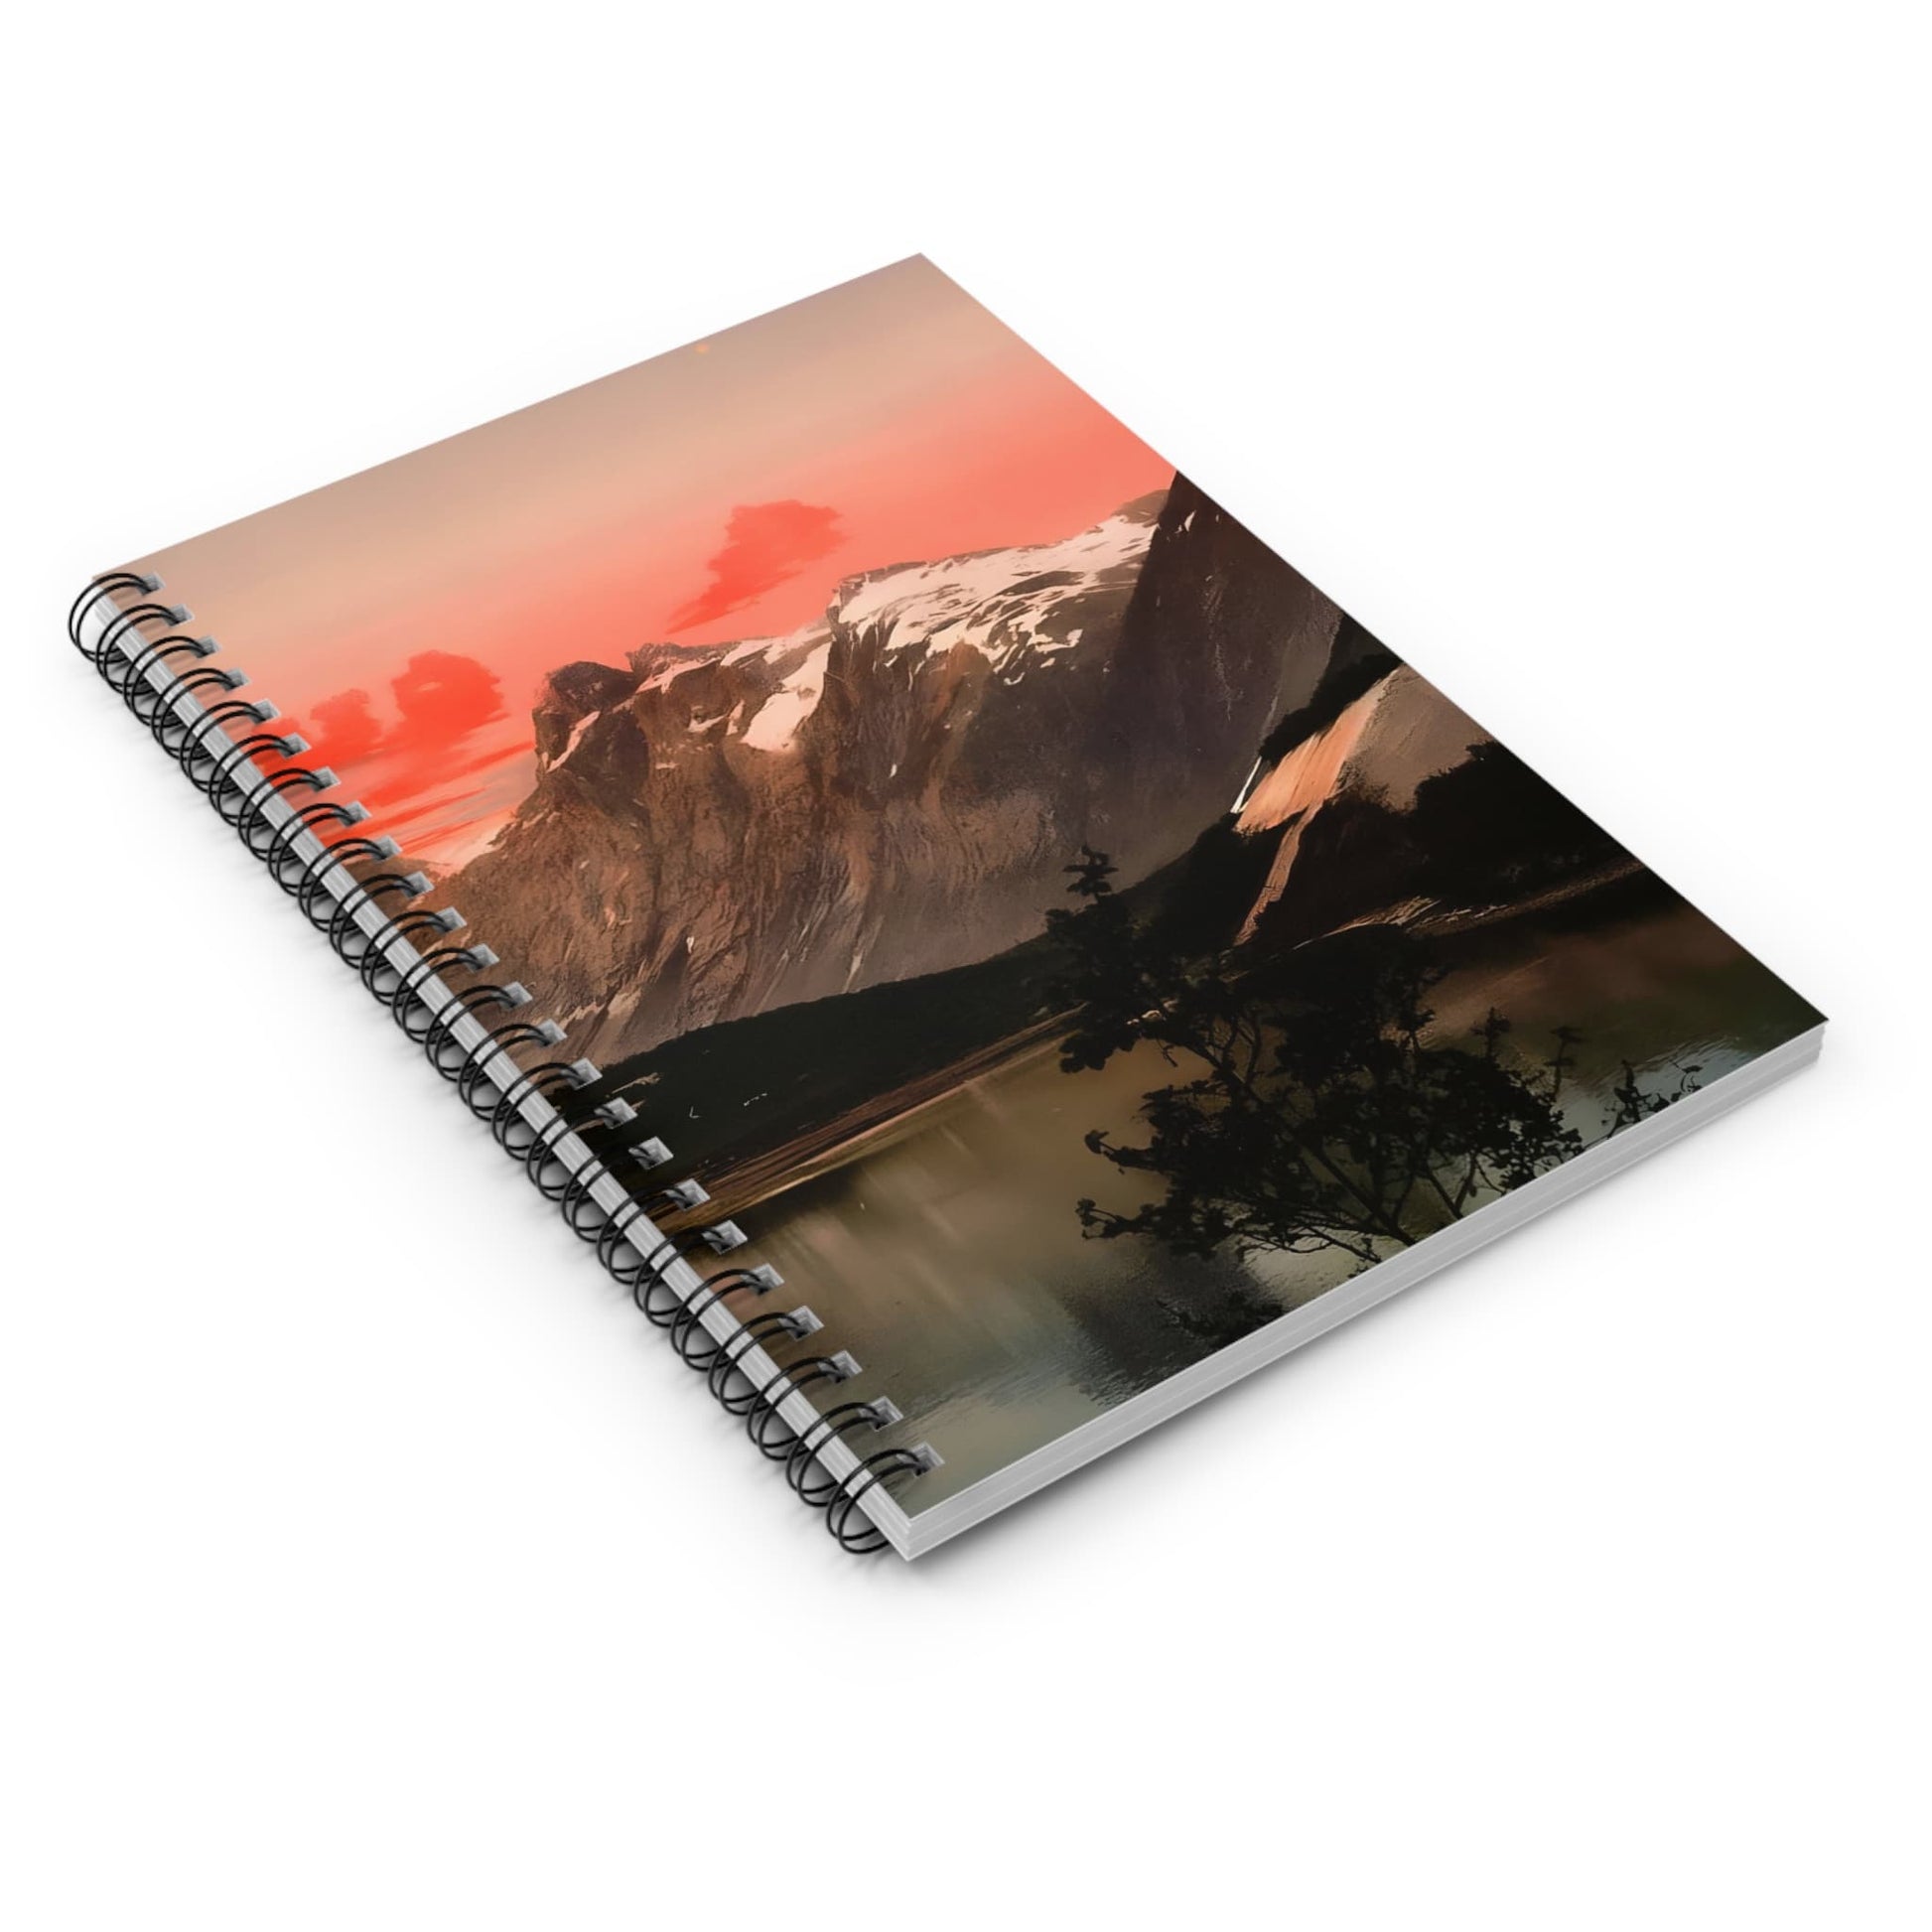 Red Mountain Sunset Spiral Notebook Laying Flat on White Surface